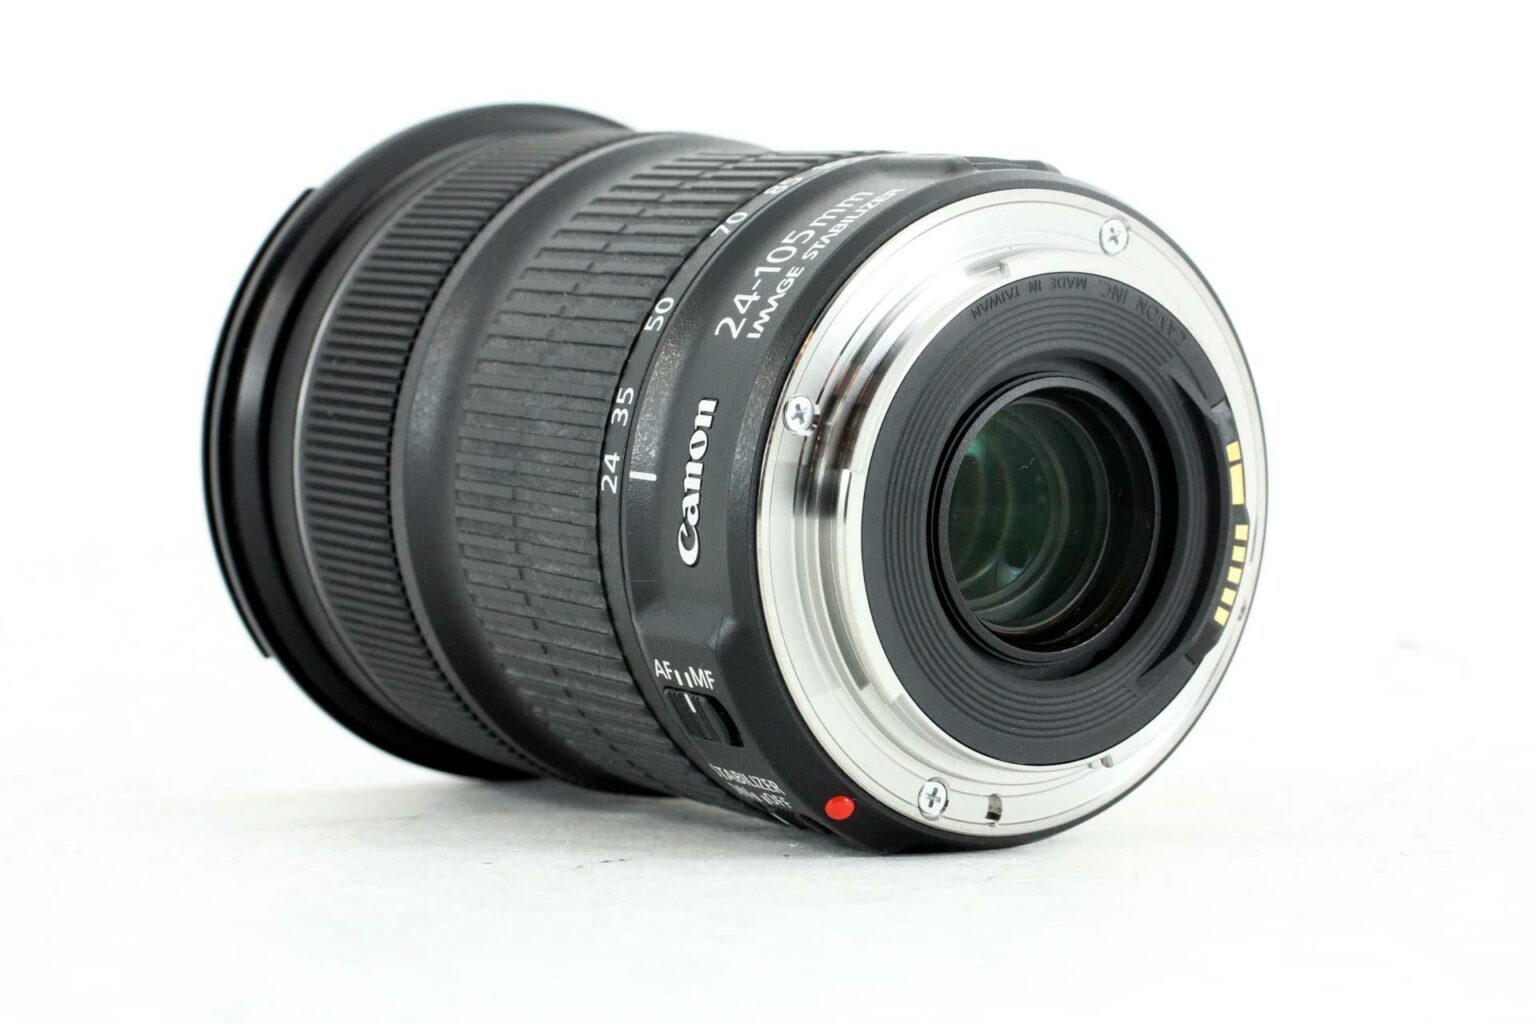 Canon EF 24-105mm f/3.5-5.6 IS STM Lens - Lenses and Cameras